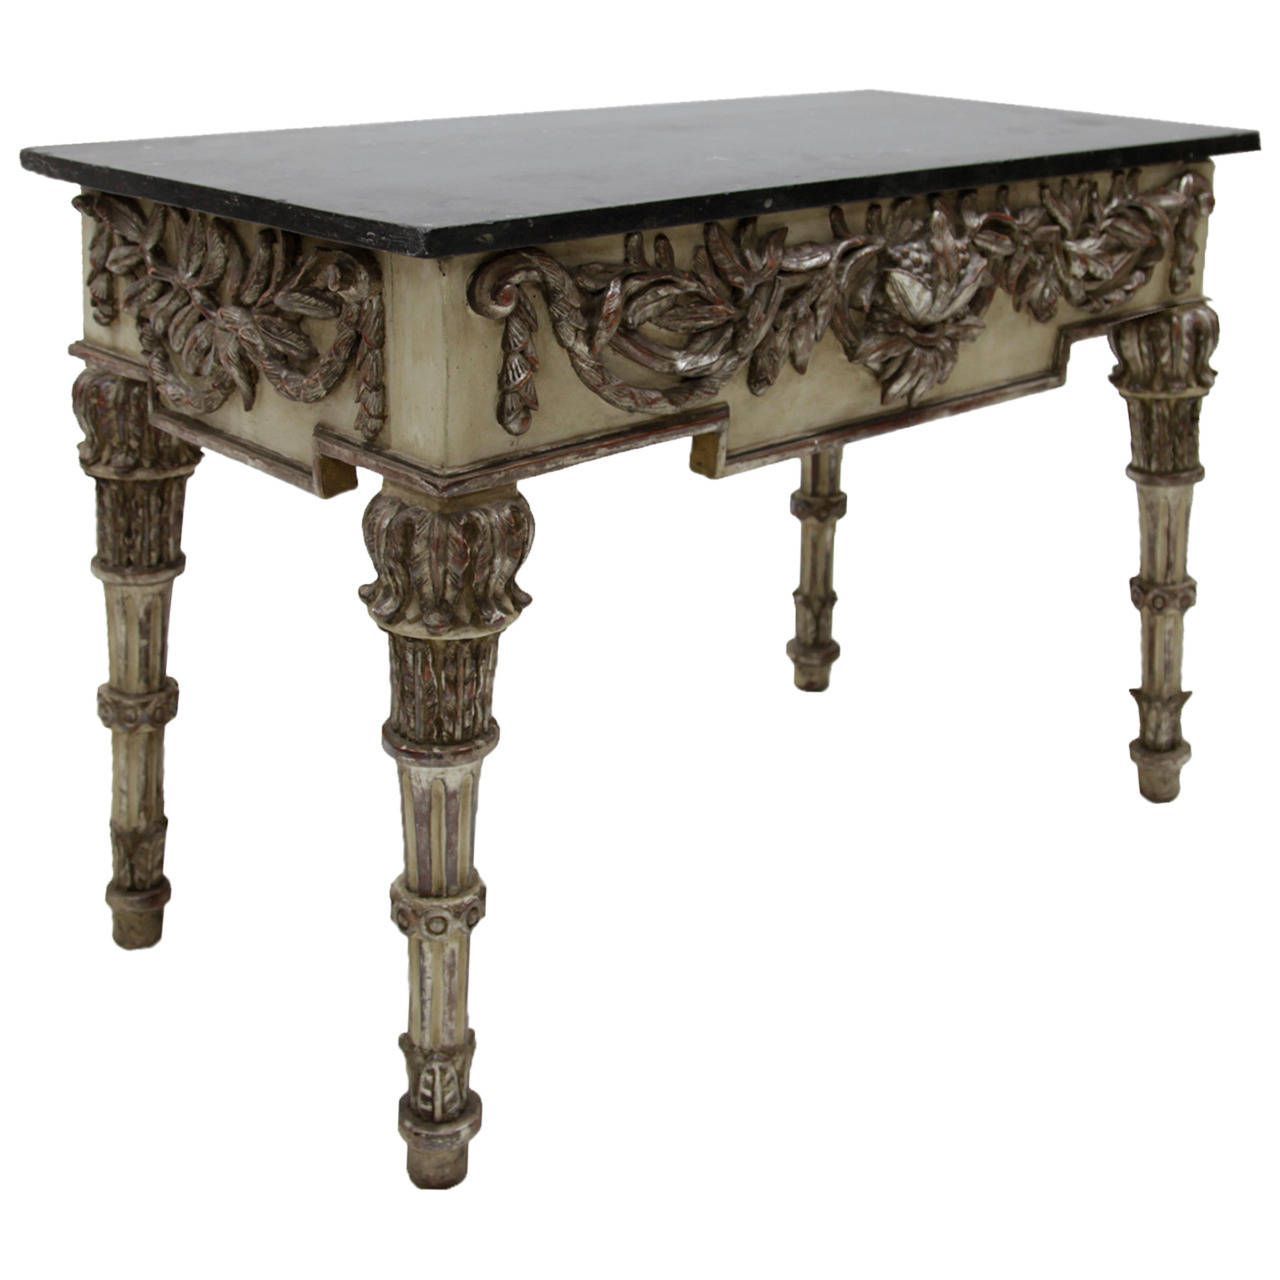 Exquisite Italian Console Table With Black Marble Top, Circa 1790s Throughout Marble Top Console Tables (View 16 of 20)